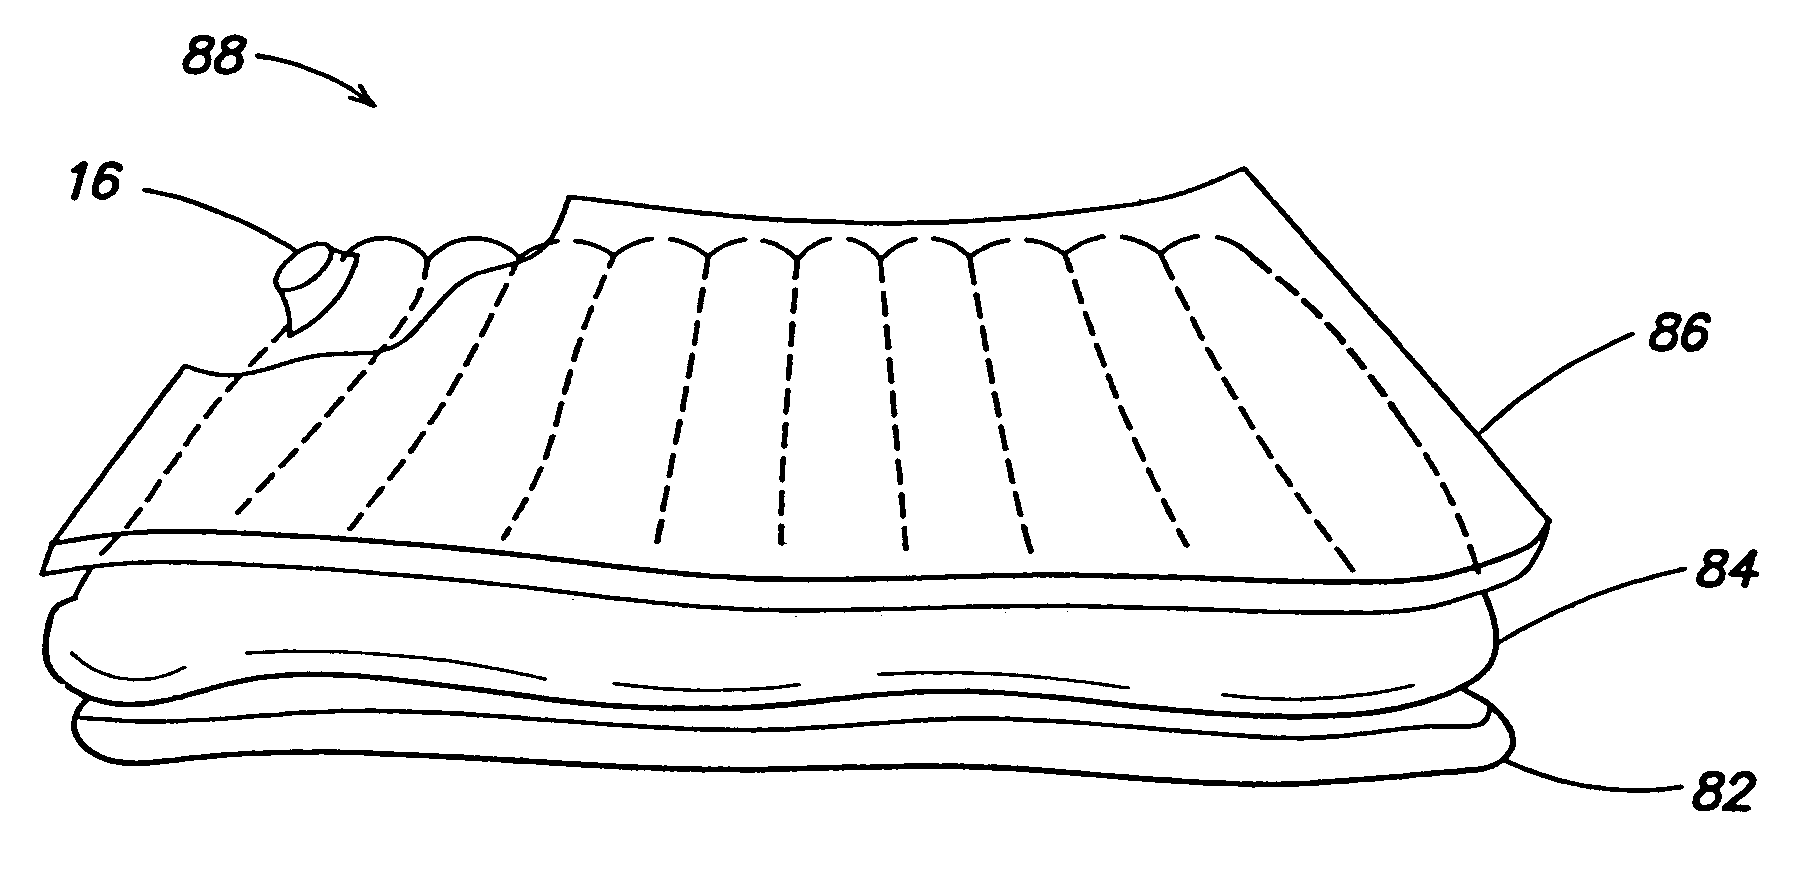 Body support surface comfort device